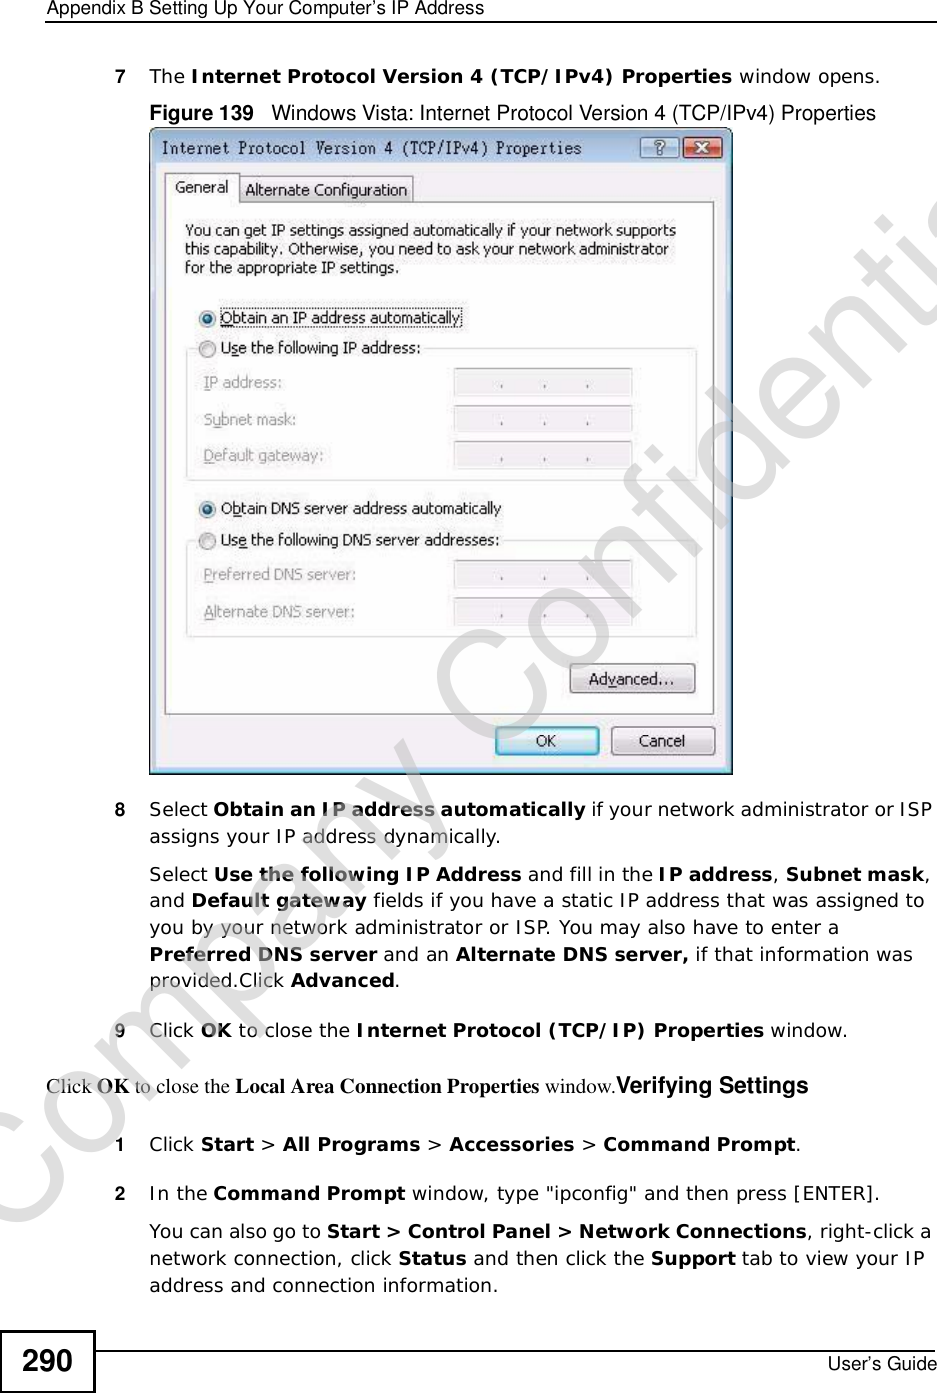 Appendix BSetting Up Your Computer’s IP AddressUser’s Guide2907The Internet Protocol Version 4 (TCP/IPv4) Properties window opens.Figure 139   Windows Vista: Internet Protocol Version 4 (TCP/IPv4) Properties8Select Obtain an IP address automatically if your network administrator or ISP assigns your IP address dynamically.Select Use the following IP Address and fill in the IP address,Subnet mask,and Default gateway fields if you have a static IP address that was assigned to you by your network administrator or ISP. You may also have to enter a Preferred DNS server and an AlternateDNS server, if that information was provided.Click Advanced.9Click OK to close the Internet Protocol (TCP/IP) Properties window.Click OK to close the Local Area Connection Properties window.Verifying Settings1Click Start &gt; All Programs &gt; Accessories &gt; Command Prompt.2In the Command Prompt window, type &quot;ipconfig&quot; and then press [ENTER]. You can also go to Start &gt; Control Panel &gt; Network Connections, right-click a network connection, click Status and then click the Support tab to view your IP address and connection information.Company Confidential